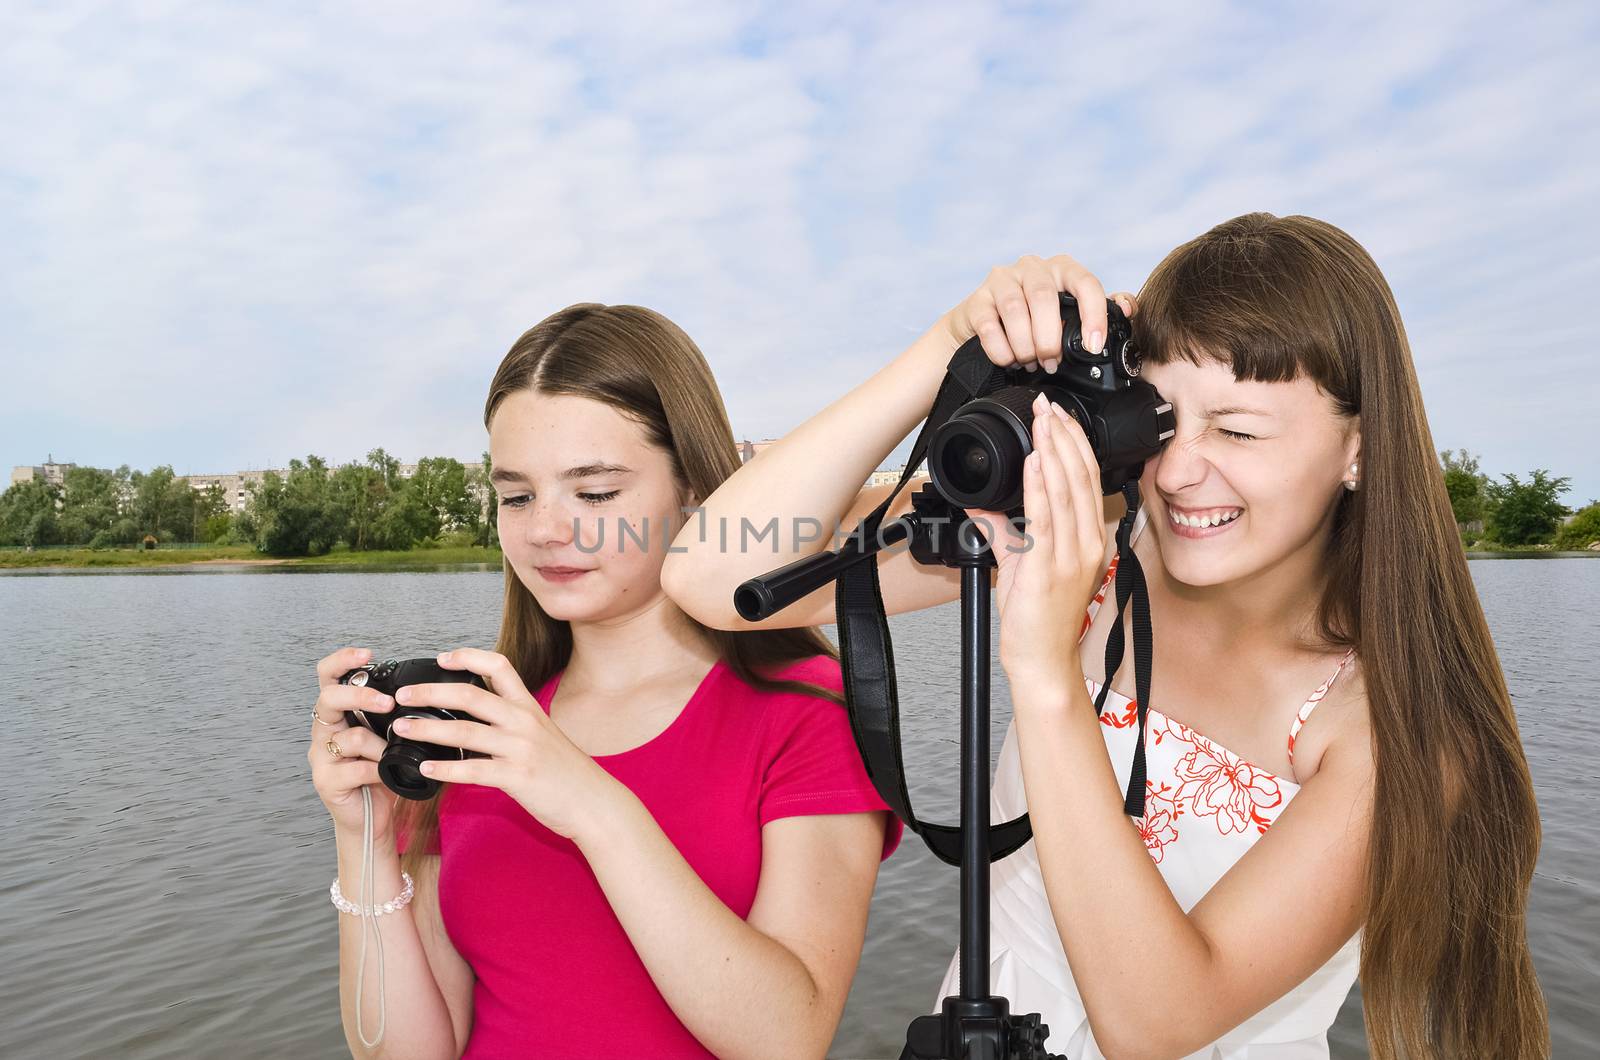 Two funny photographer teen girls outdoors by the river